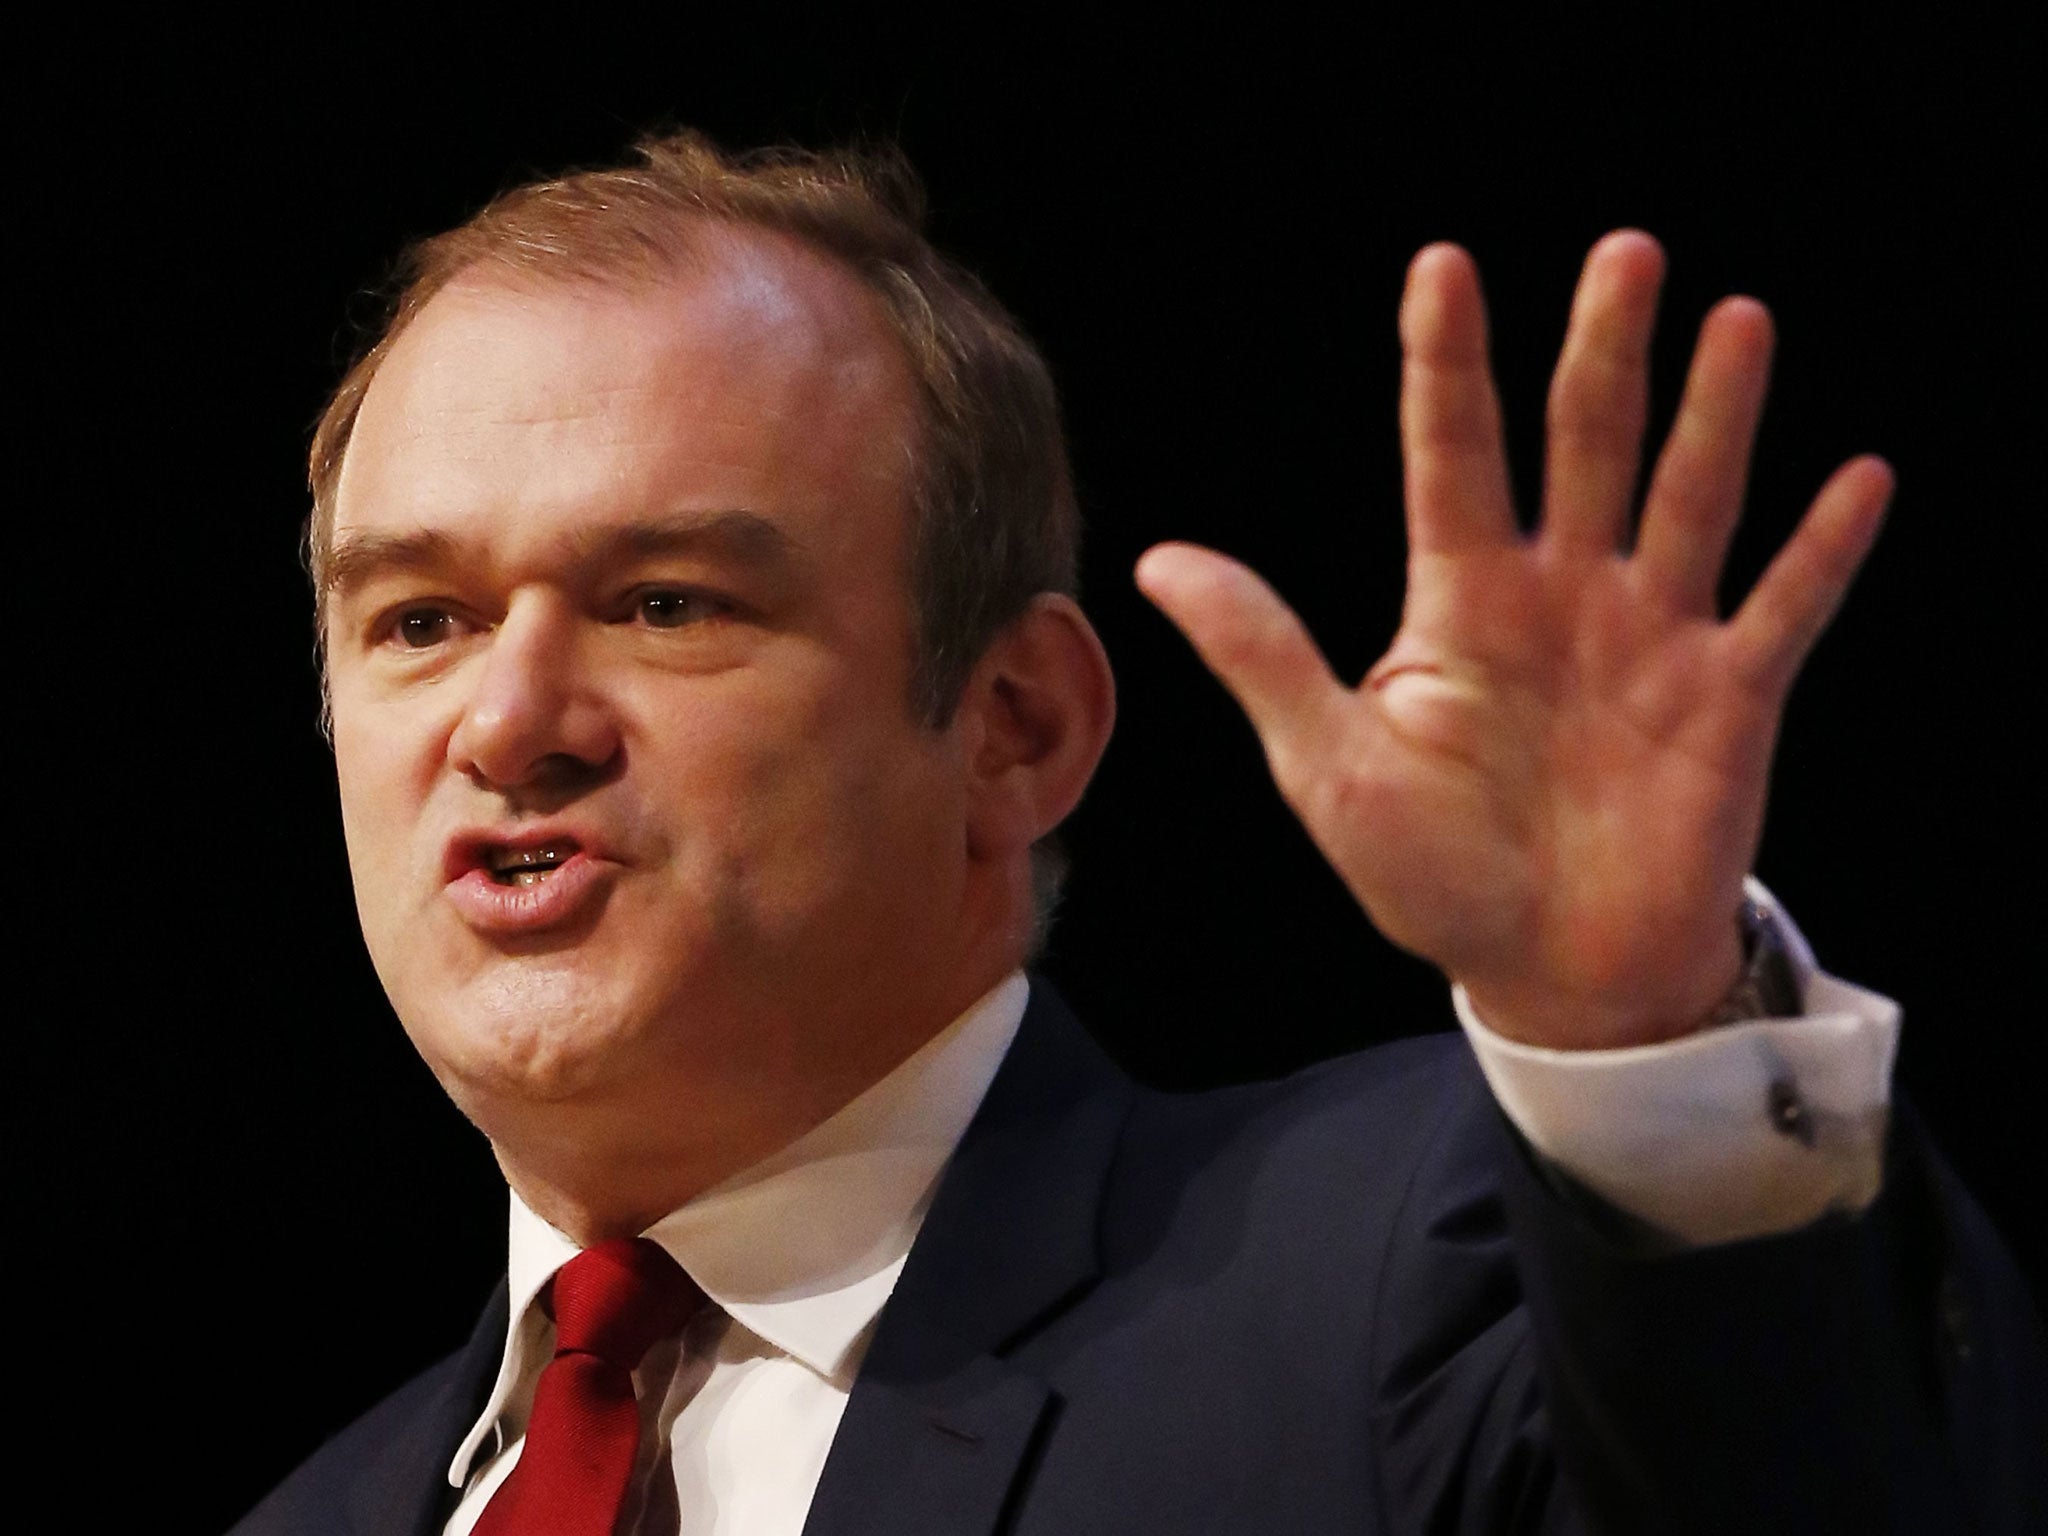 Ed Davey argues the fee cut is "stupid" and says he wants to focus on the deficit